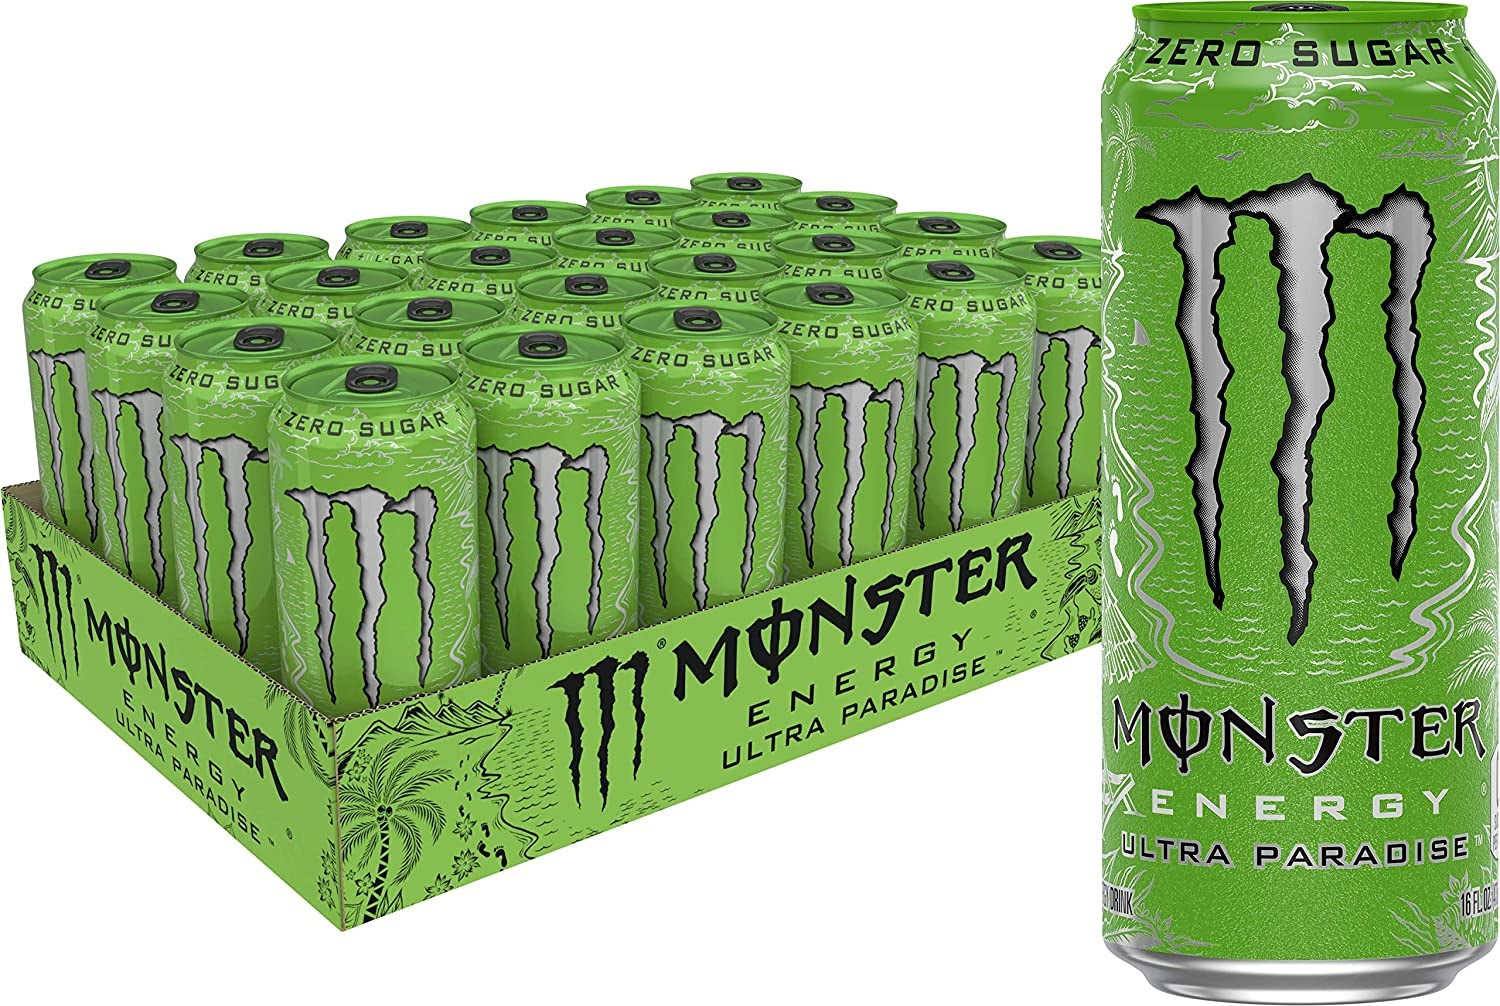 Monster 24 Pack 16 oz Energy Ultra Paradise Sugar Free Energy Drink 280 Cases.  EXW Los Angeles $32.00/Pack of 24.